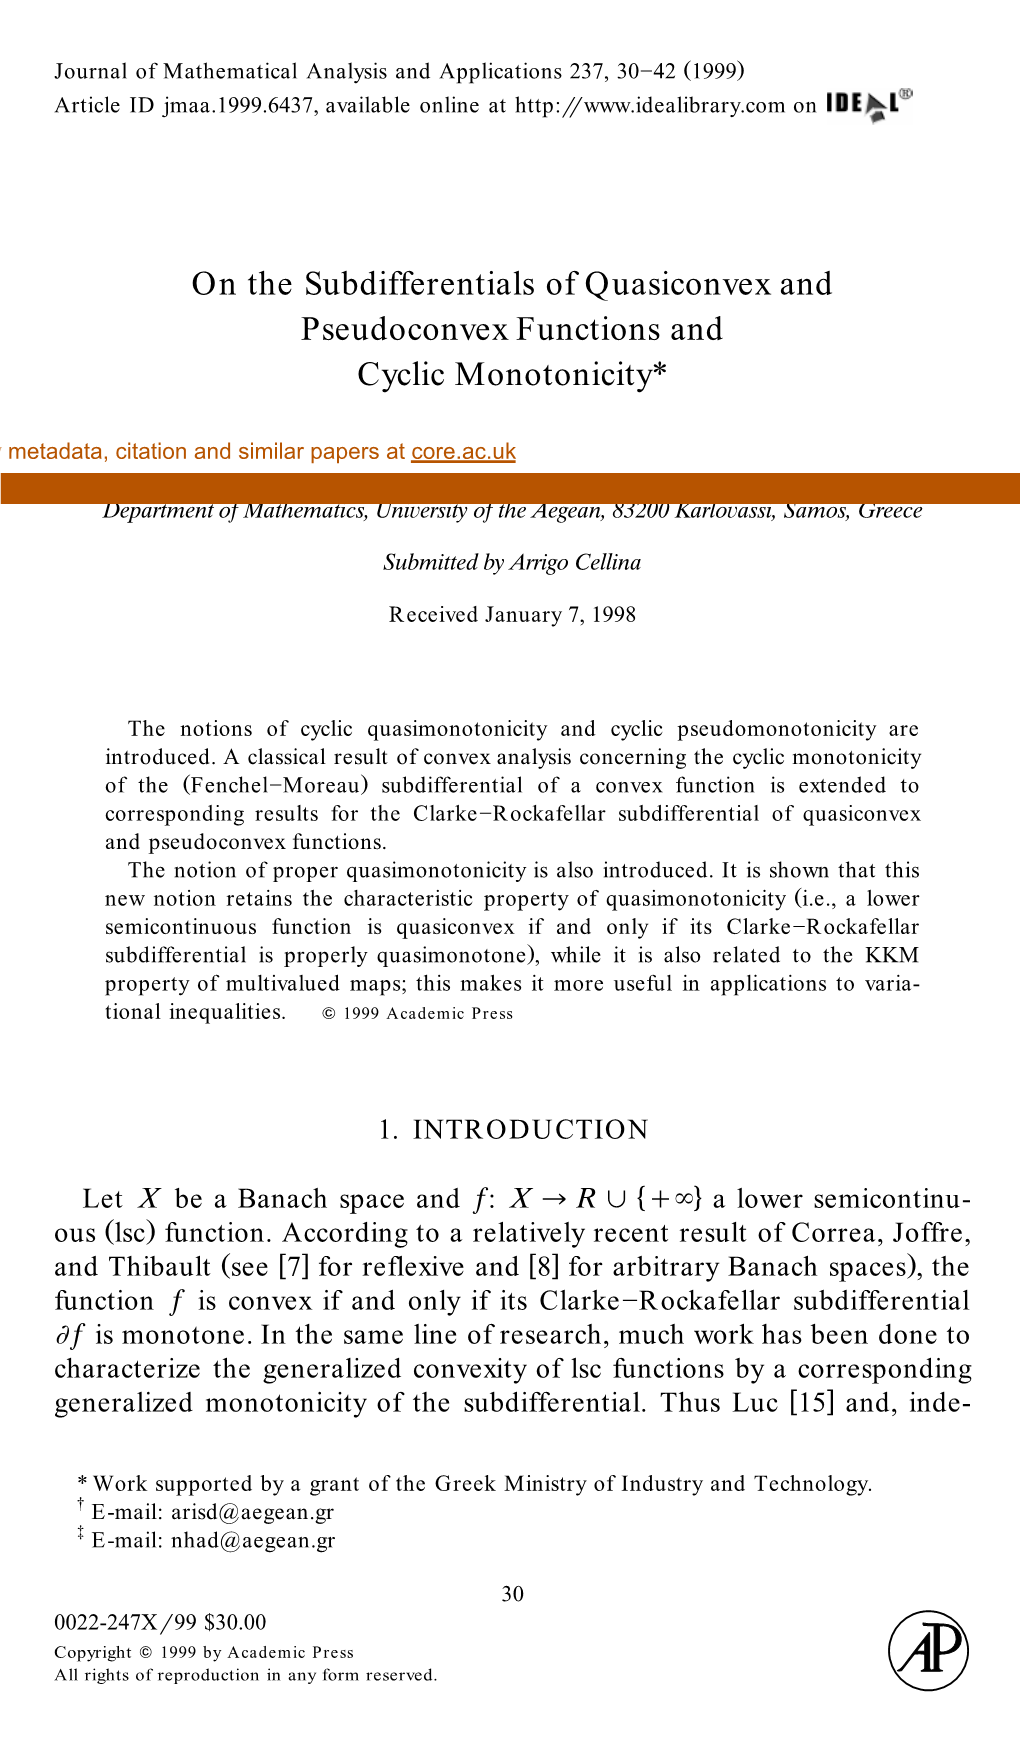 On the Subdifferentials of Quasiconvex and Pseudoconvex Functions and Cyclic Monotonicity*